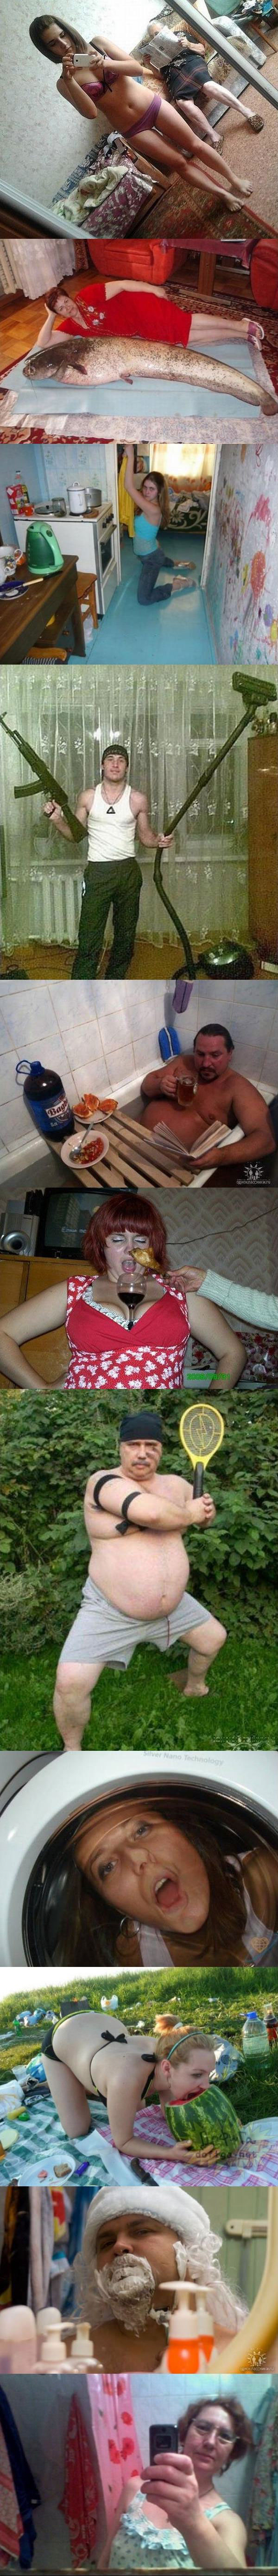 Russian dating site photos